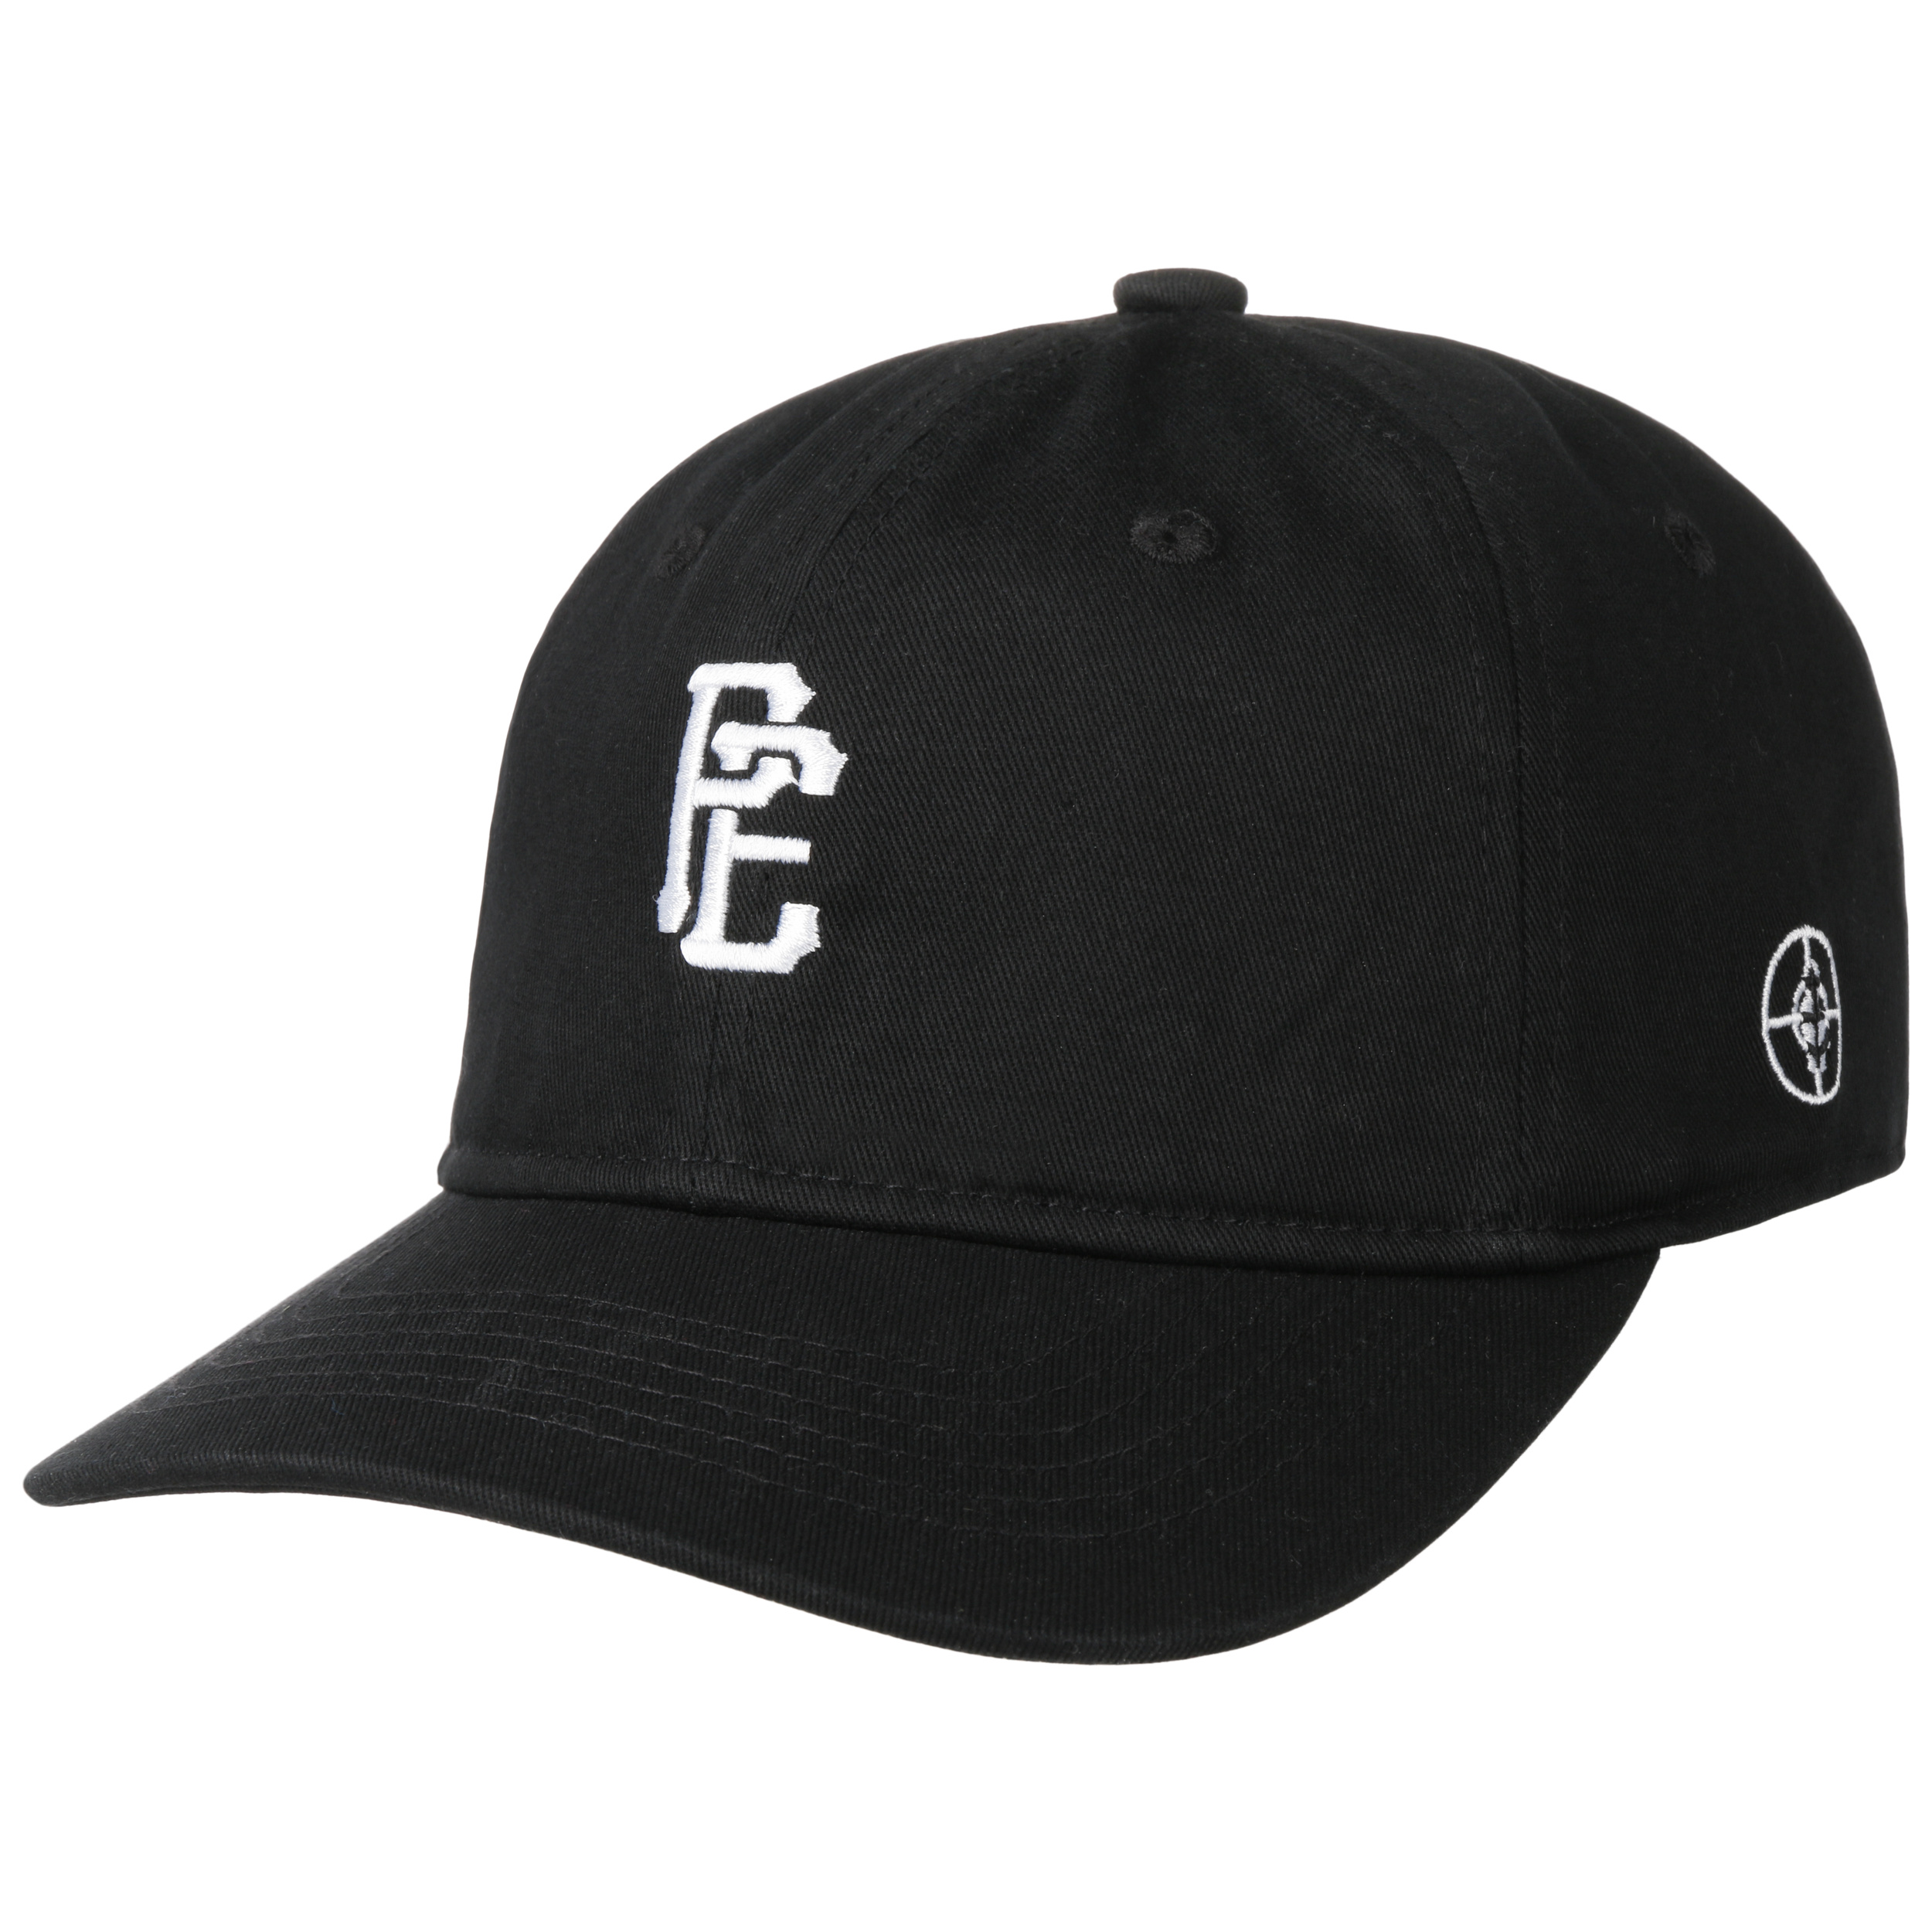 Pexe Pool Cap by Element - 42,95